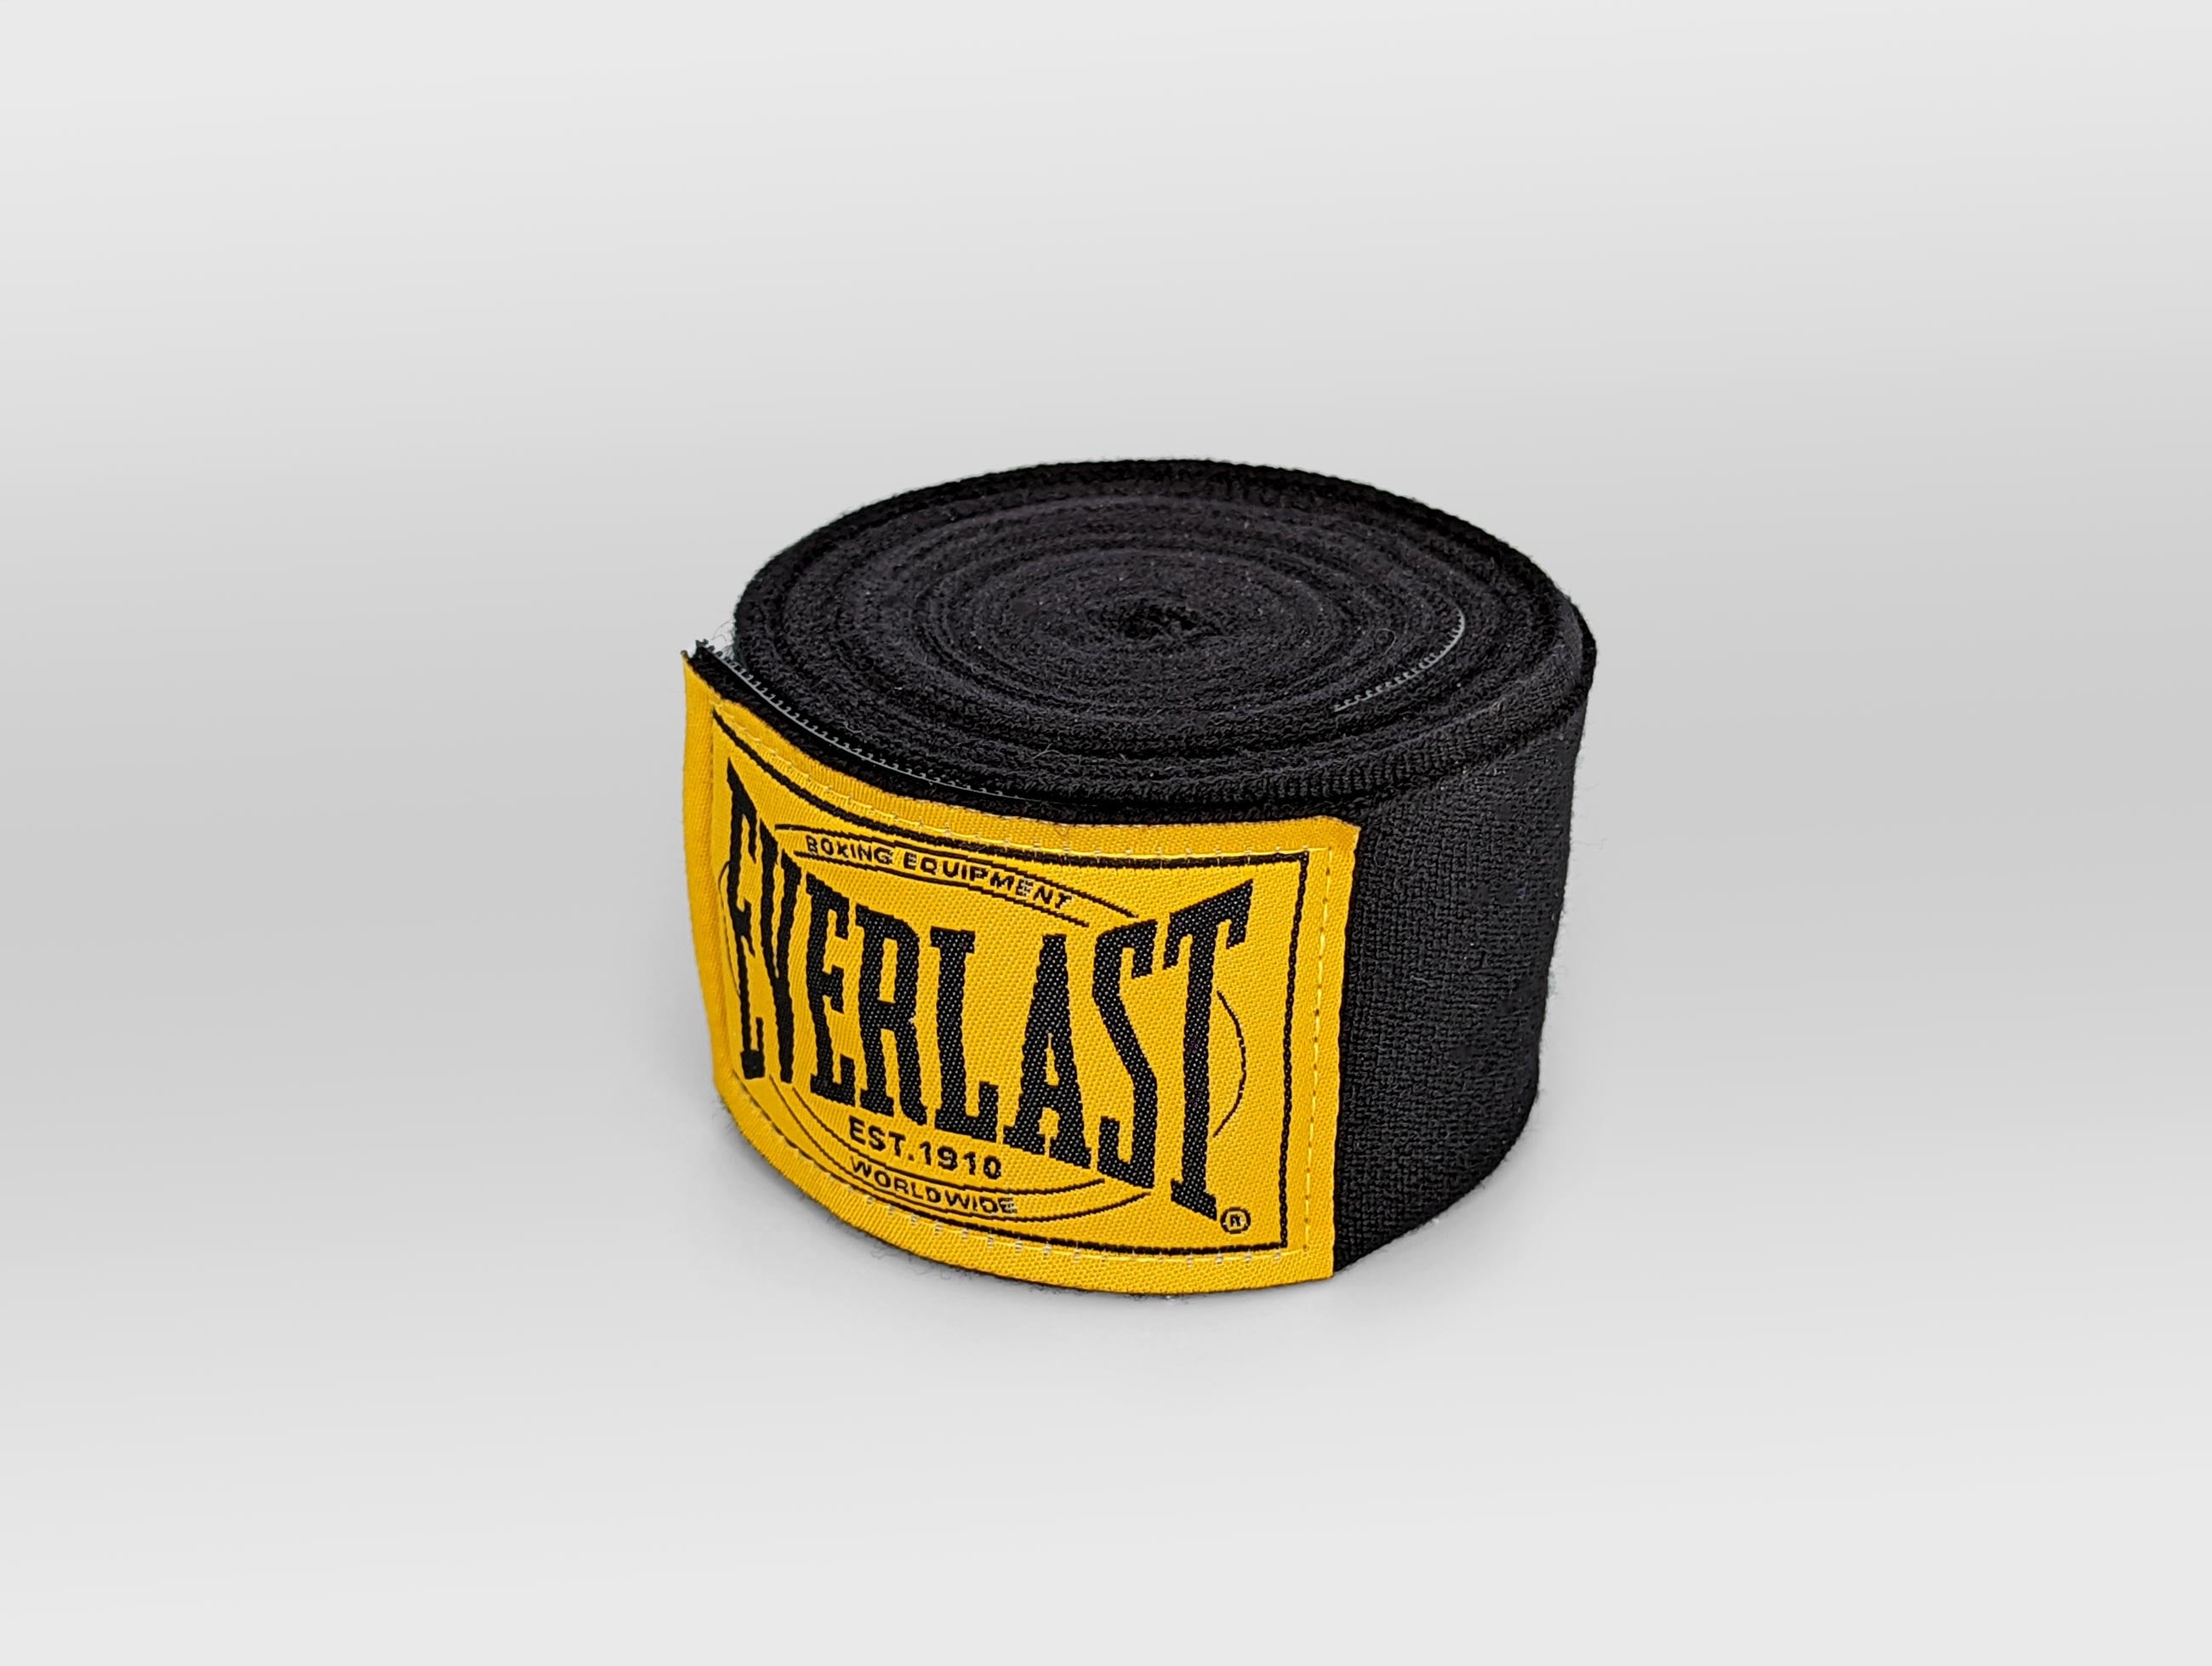 Everlast 1910 Hand Wraps in Black, a great set of hand wraps for kickboxing beginners.